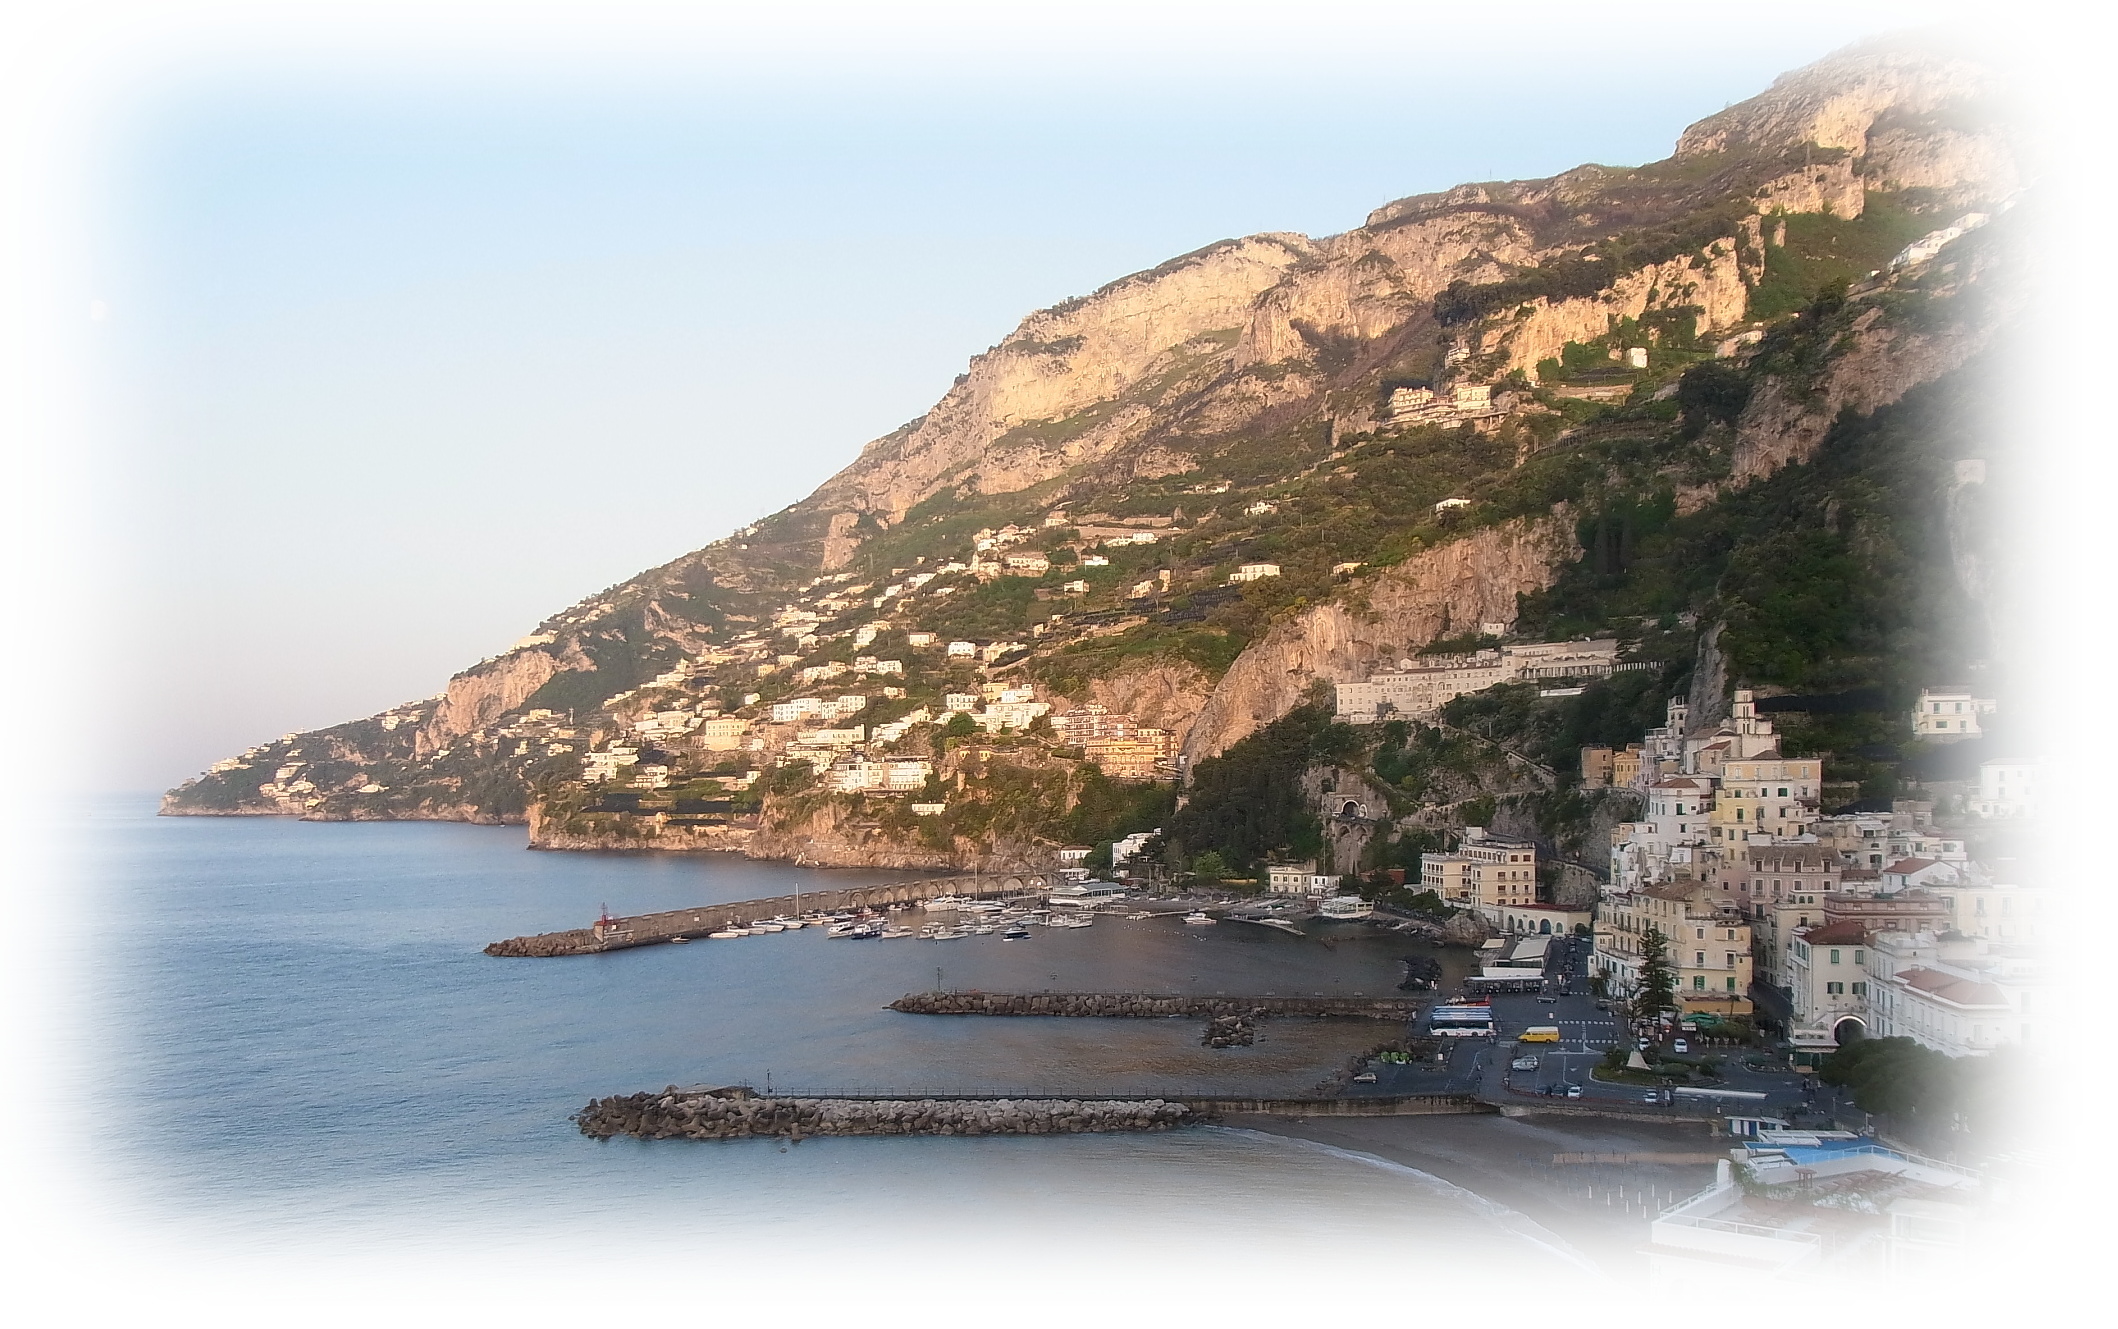 Amalfi coast seen from Hotel Luna convento in the early morning. 